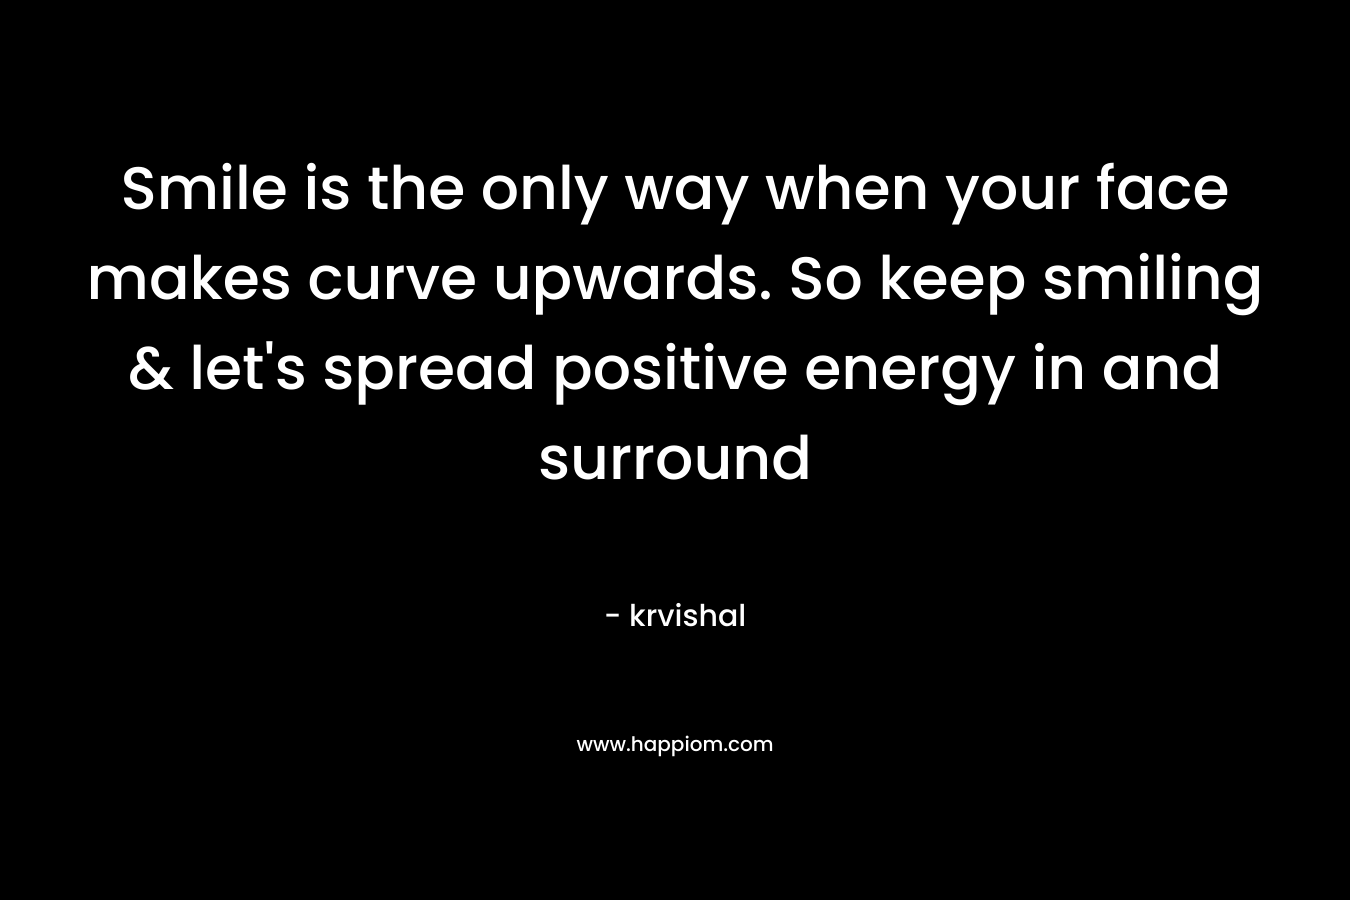 Smile is the only way when your face makes curve upwards. So keep smiling & let's spread positive energy in and surround